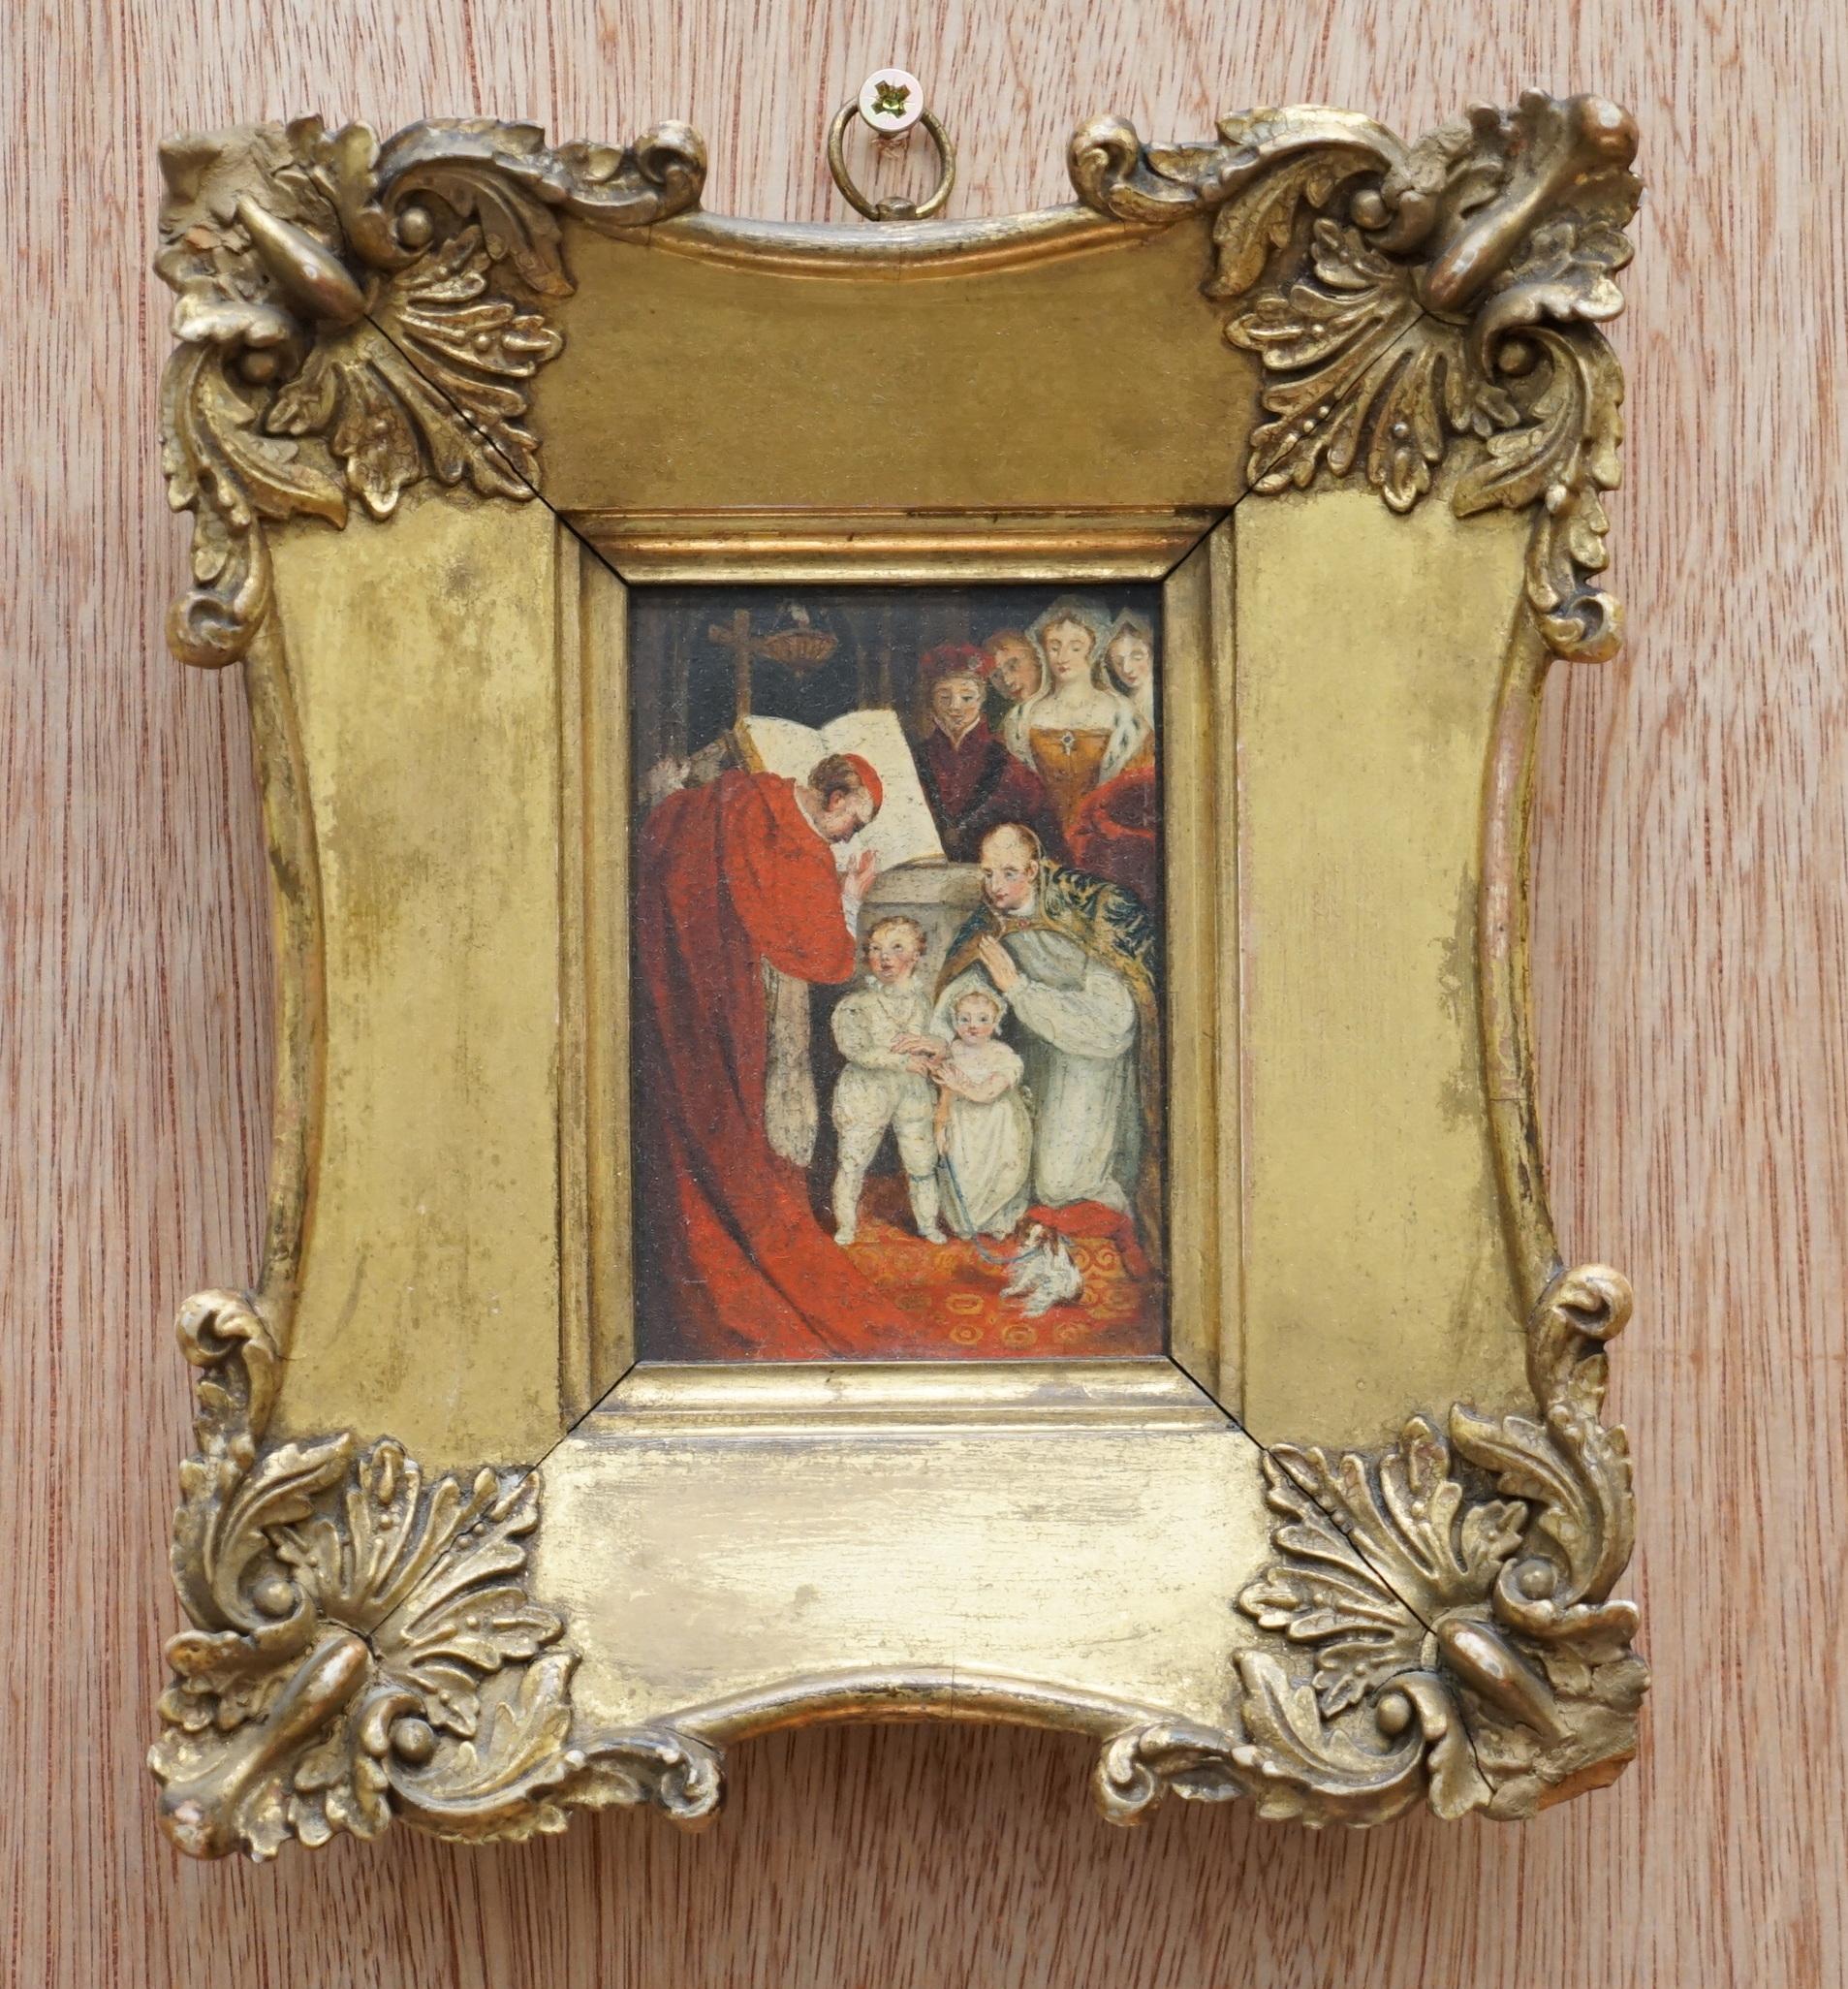 Royal House Antiques is delighted to offer for sale this stunning pair of 16th to 17th century, miniature oil paintings which are after the originals by James Northcote (1480-1517) the originals are titled 